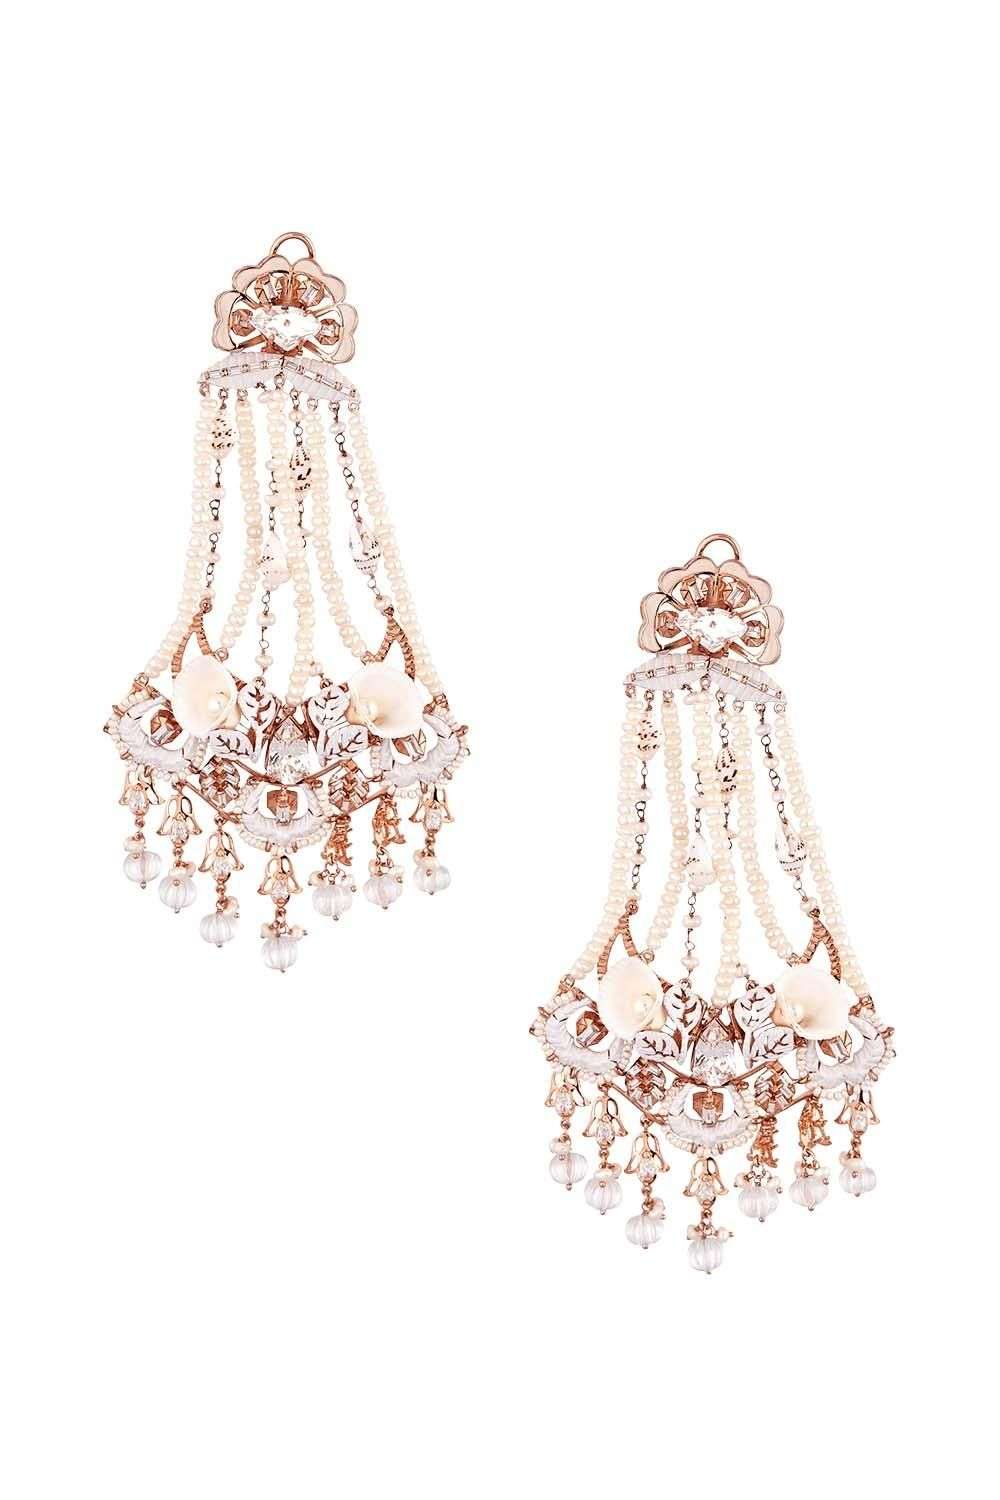 Etnico Traditional Metal Gold Plated and Pearl Chand Bali Earrings for